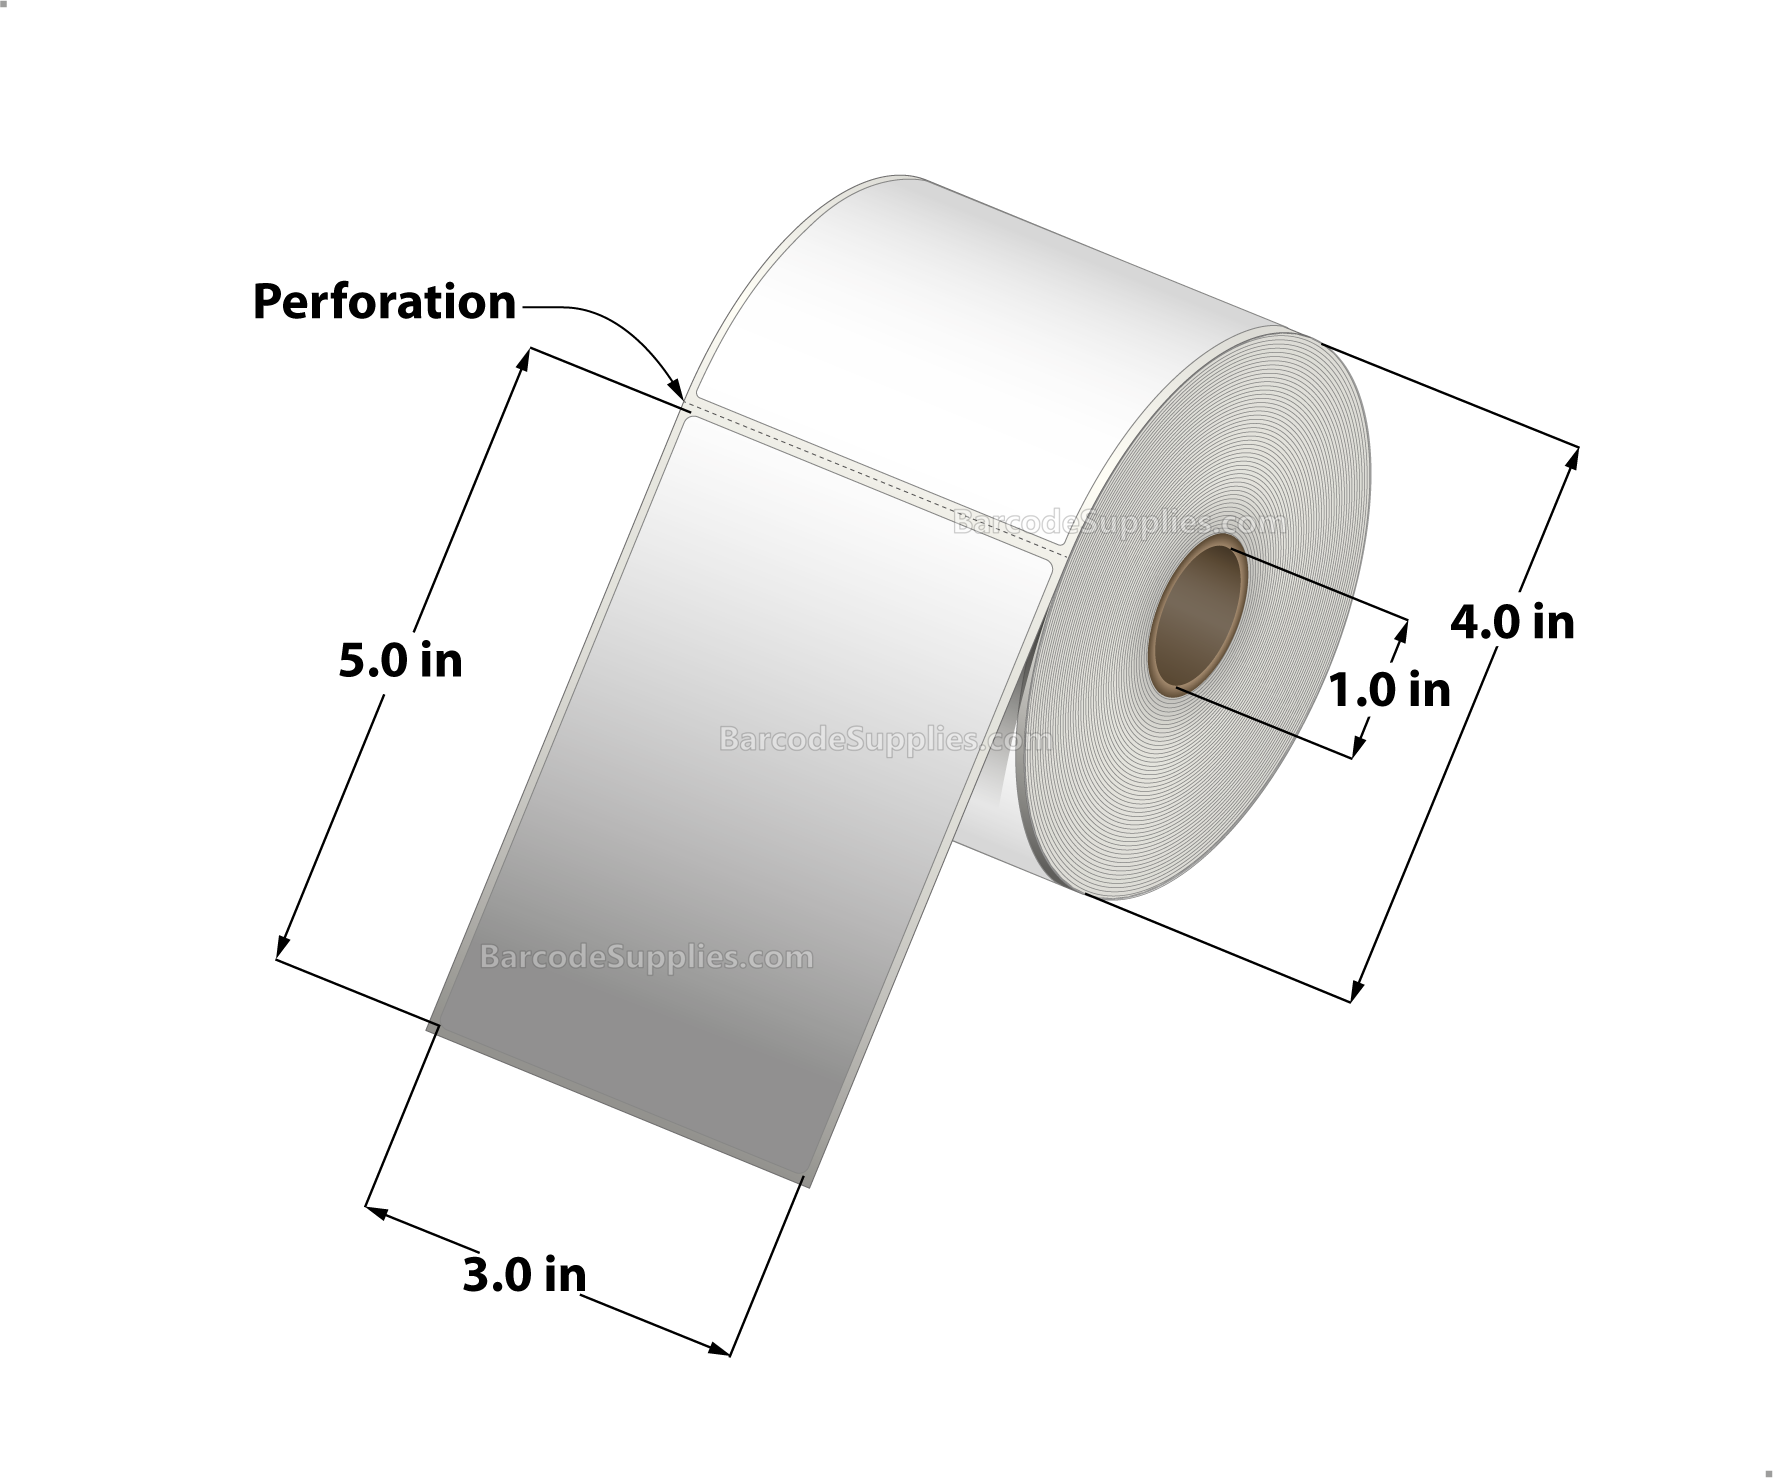 3 x 5 Direct Thermal White Labels With Acrylic Adhesive - Perforated - 300 Labels Per Roll - Carton Of 12 Rolls - 3600 Labels Total - MPN: RD-3-5-300-1